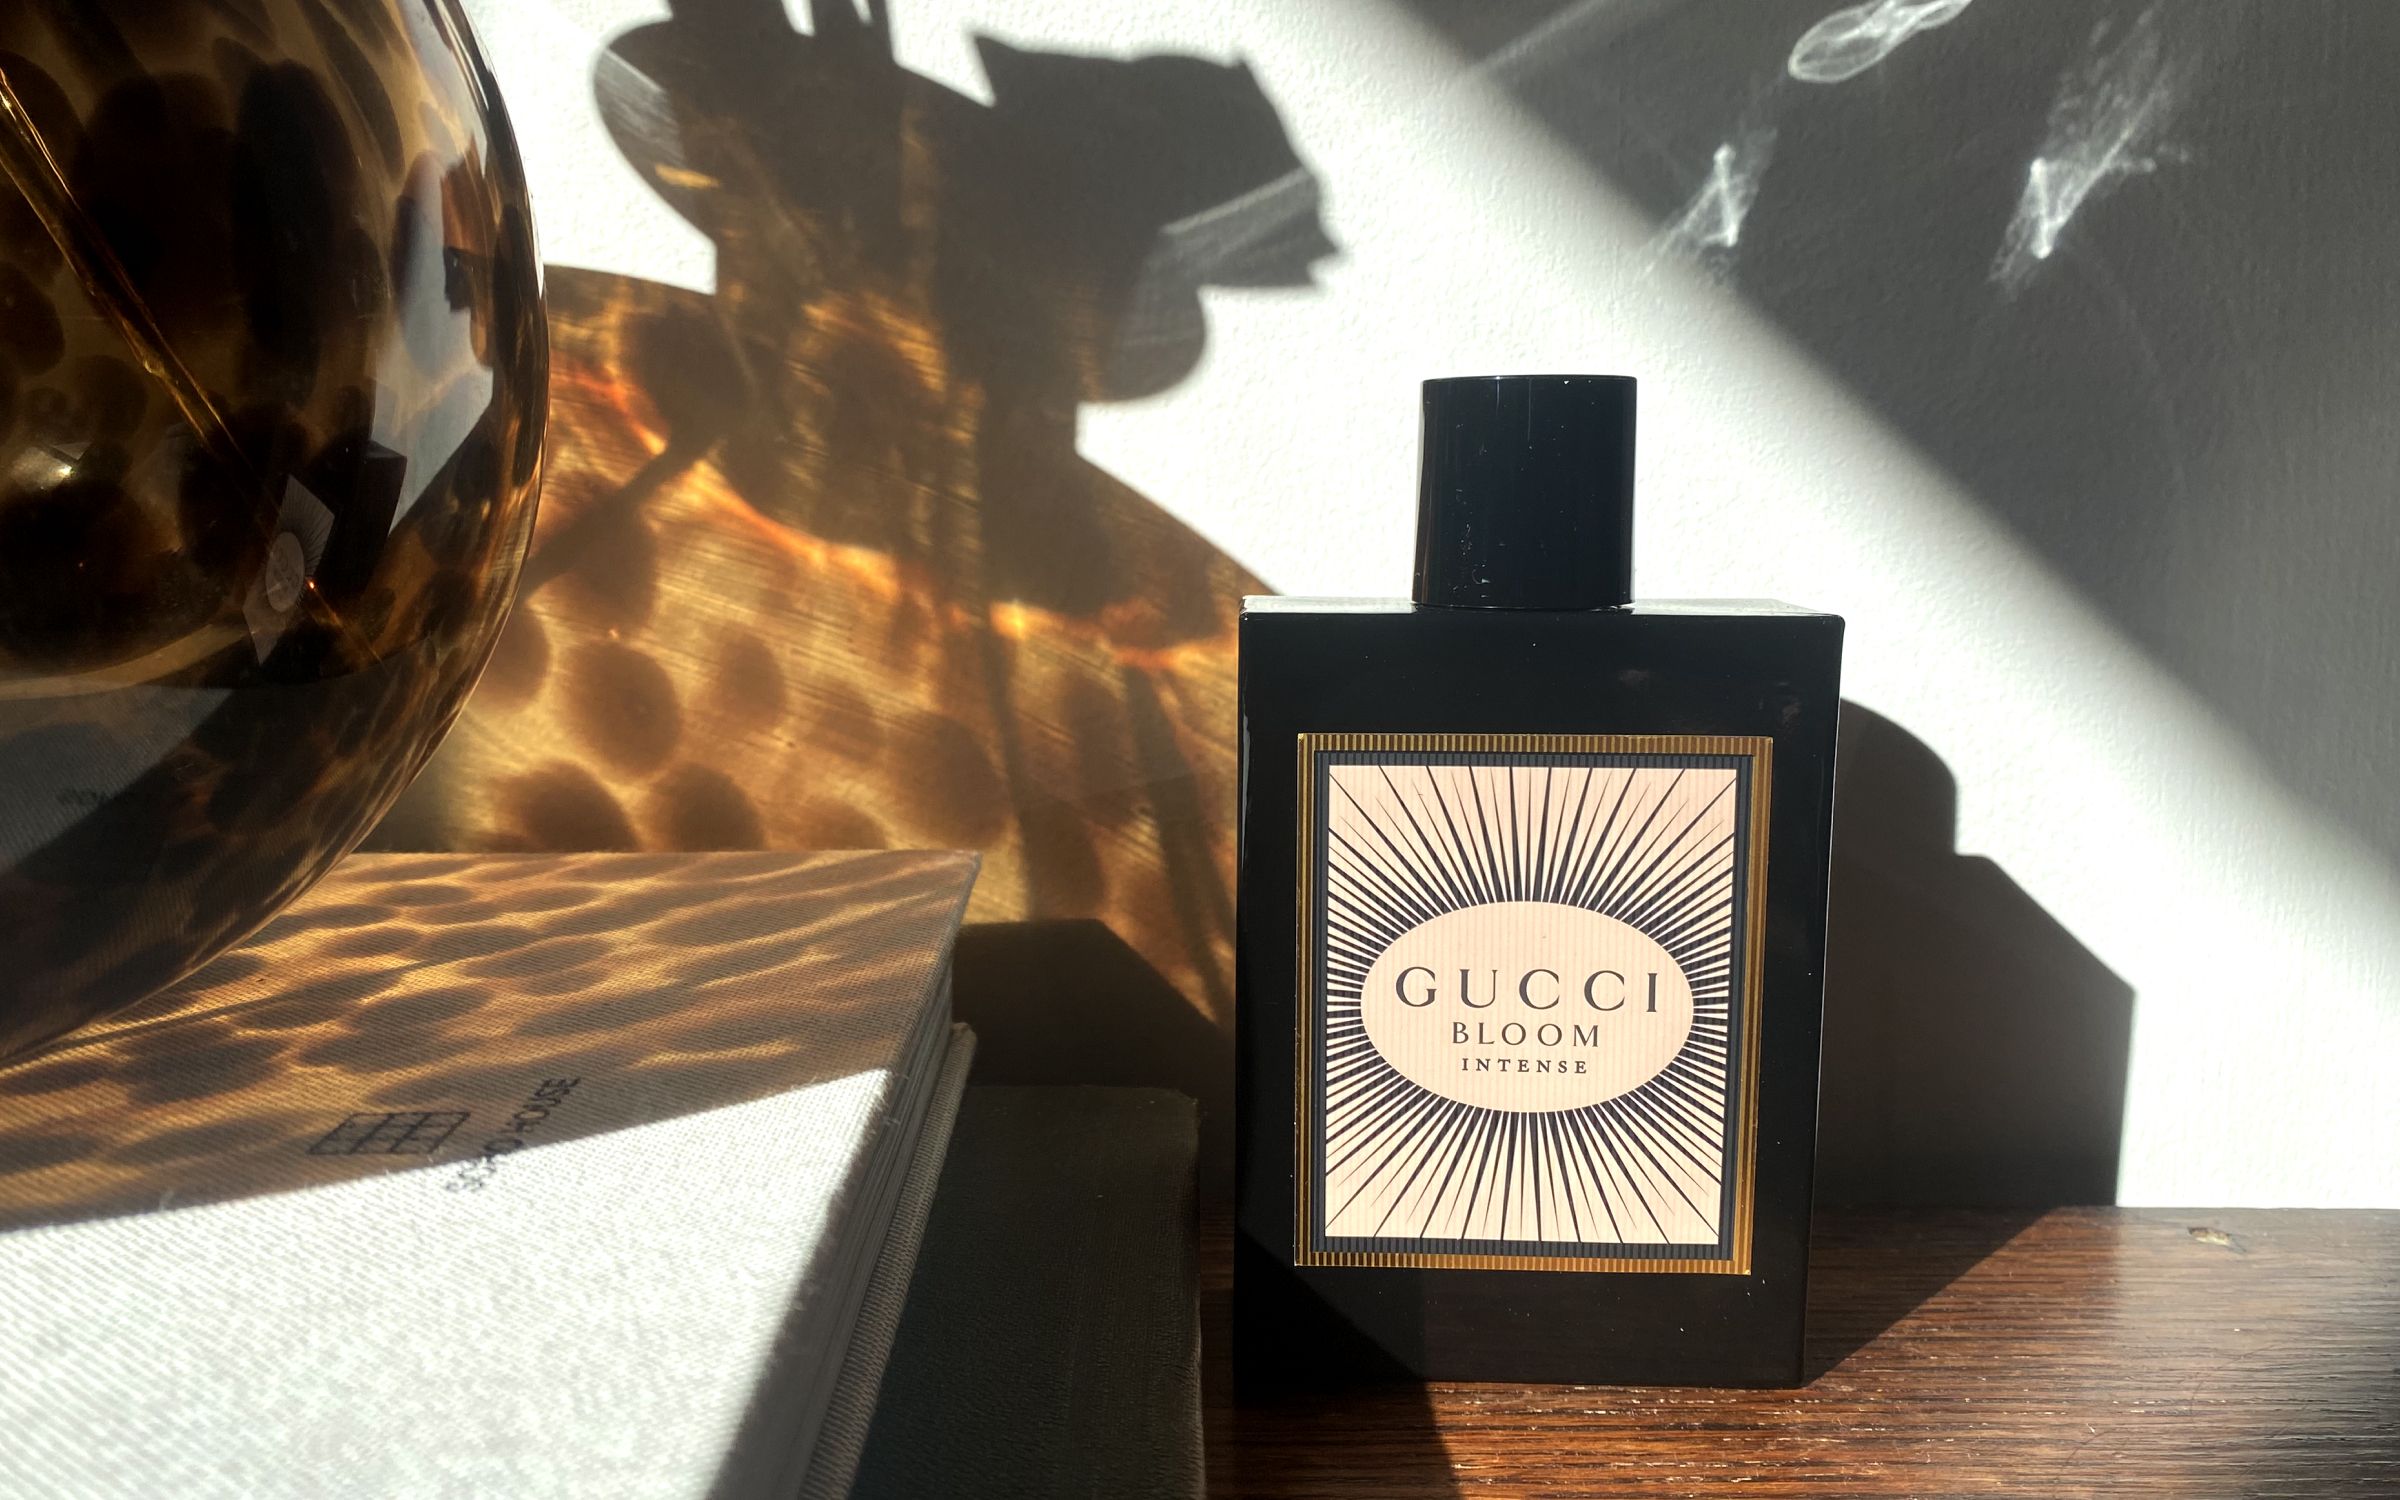 Our Beauty Editor’s first impressions of Gucci’s NEW scent